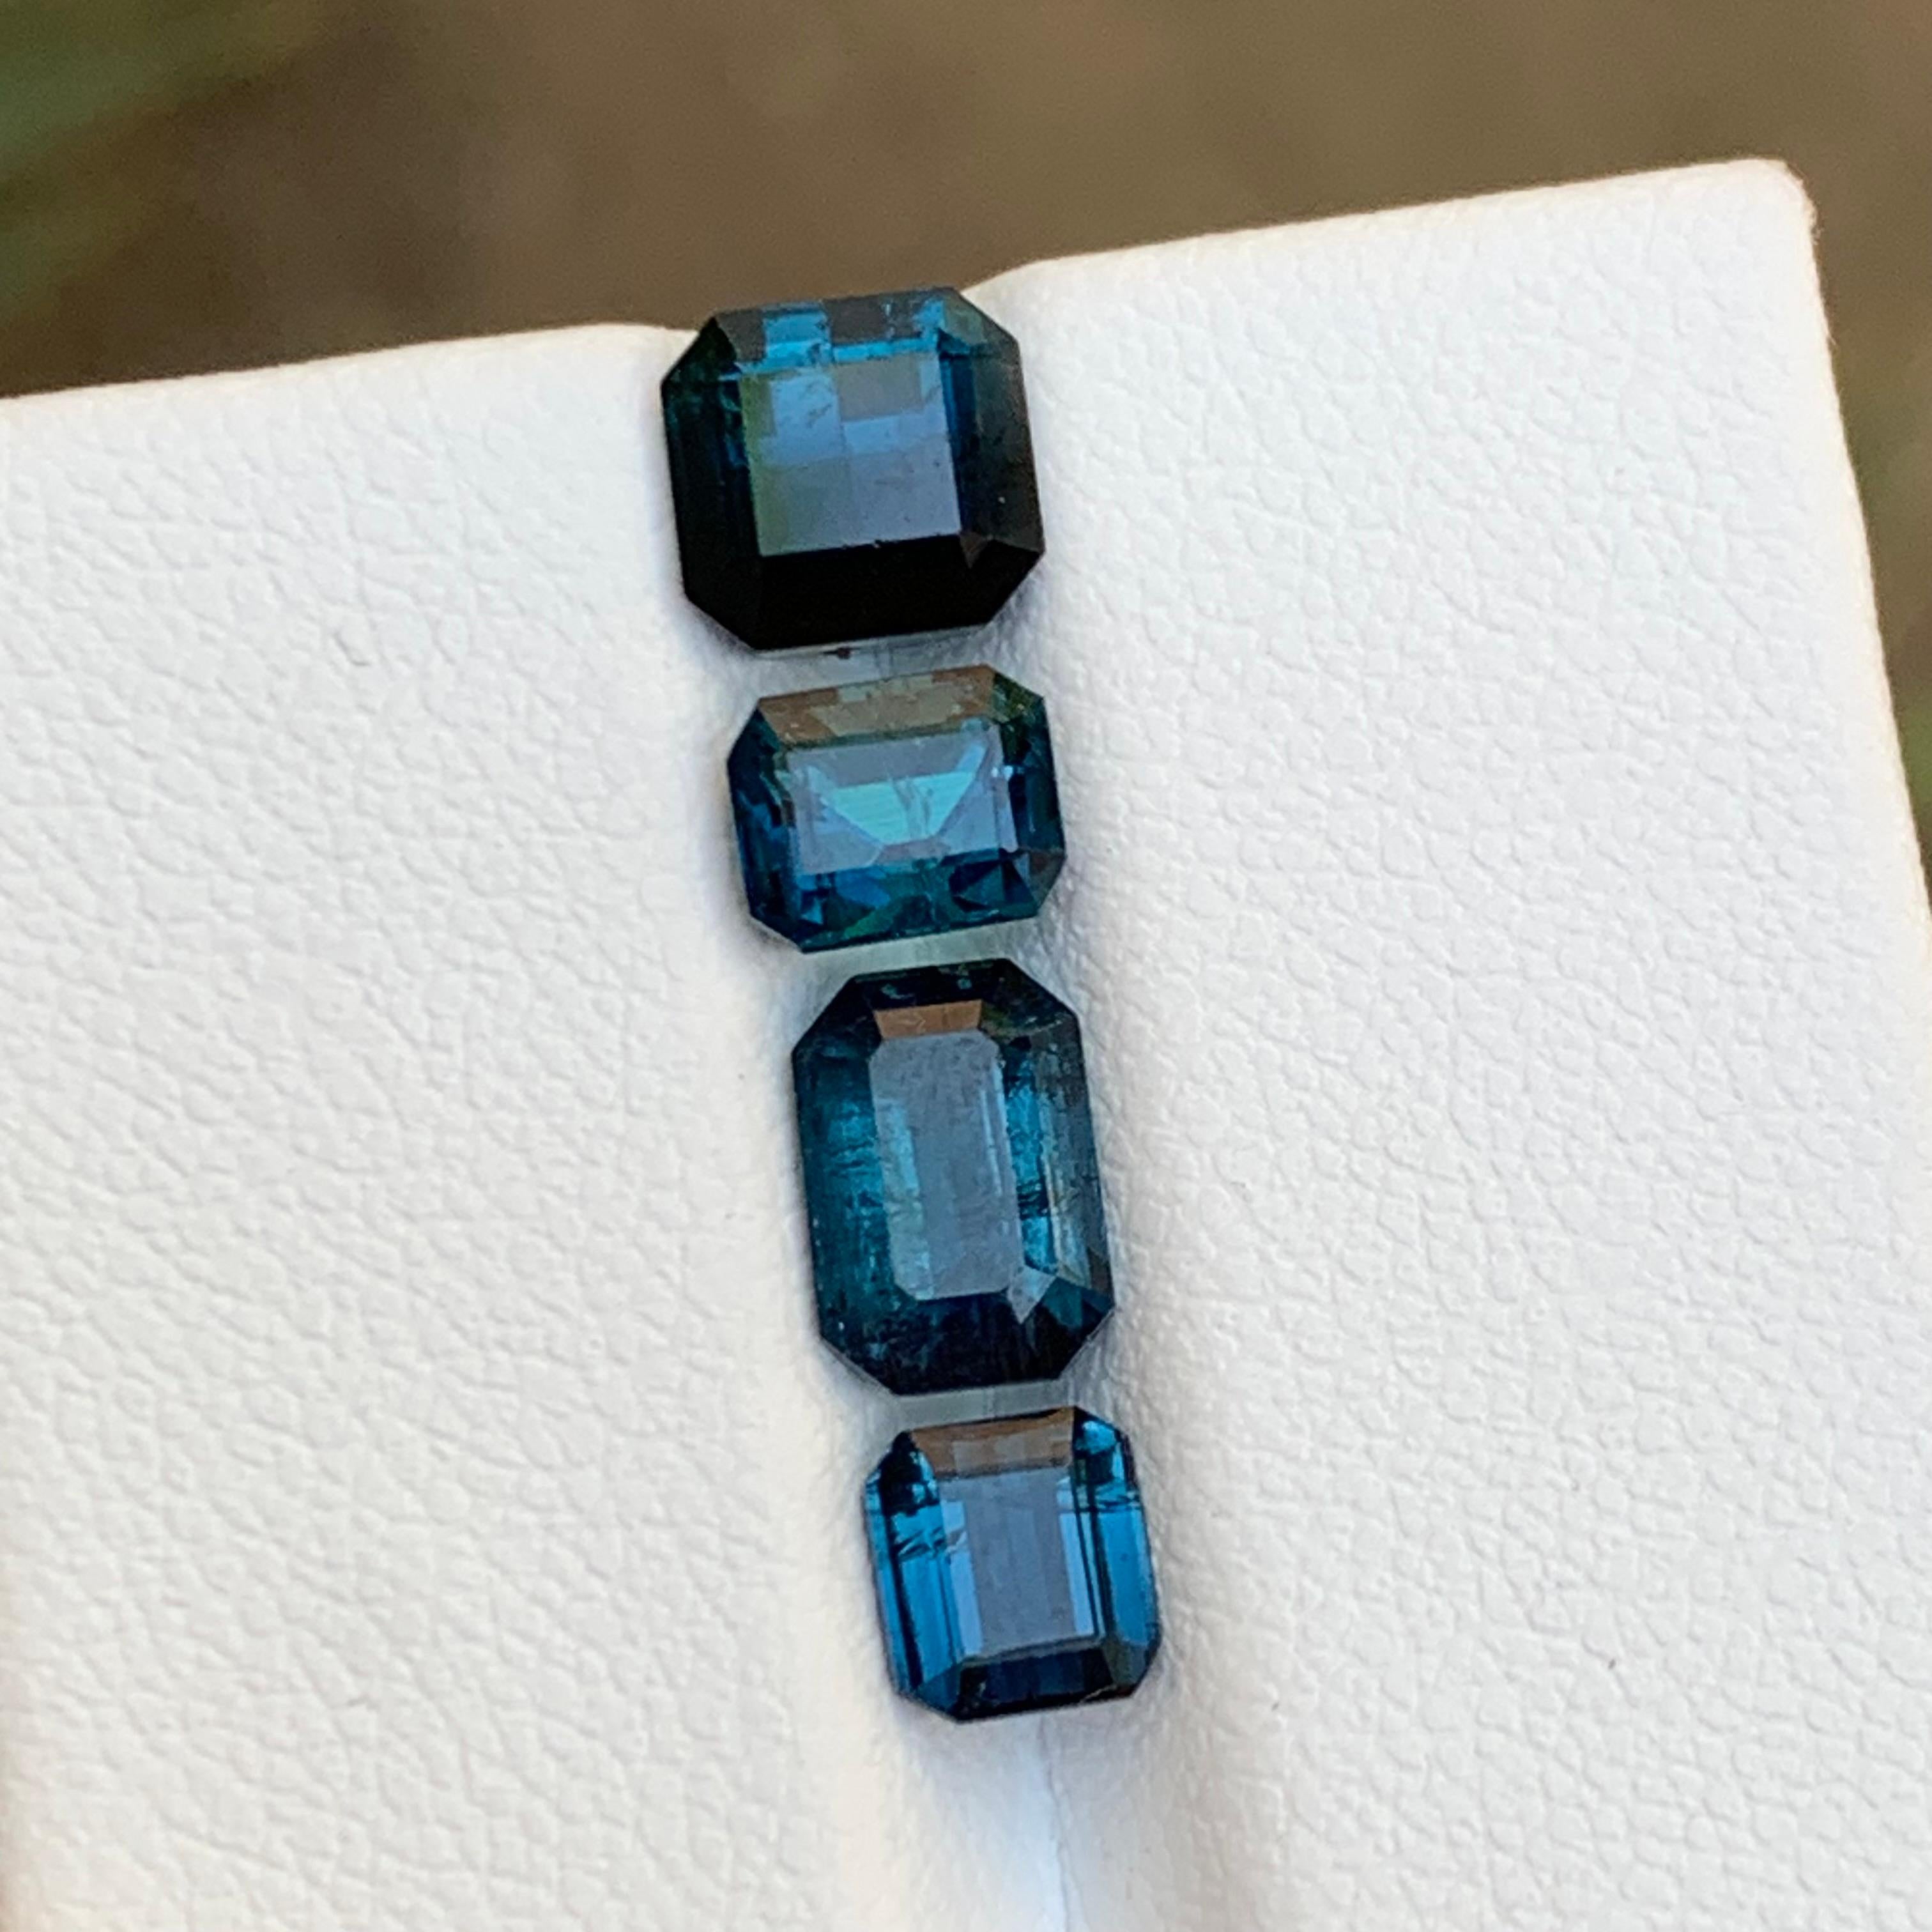 Rare Darkish Inky Blue Natural Tourmaline Gemstones Lot, 4.85 Ct for Jewelry For Sale 2